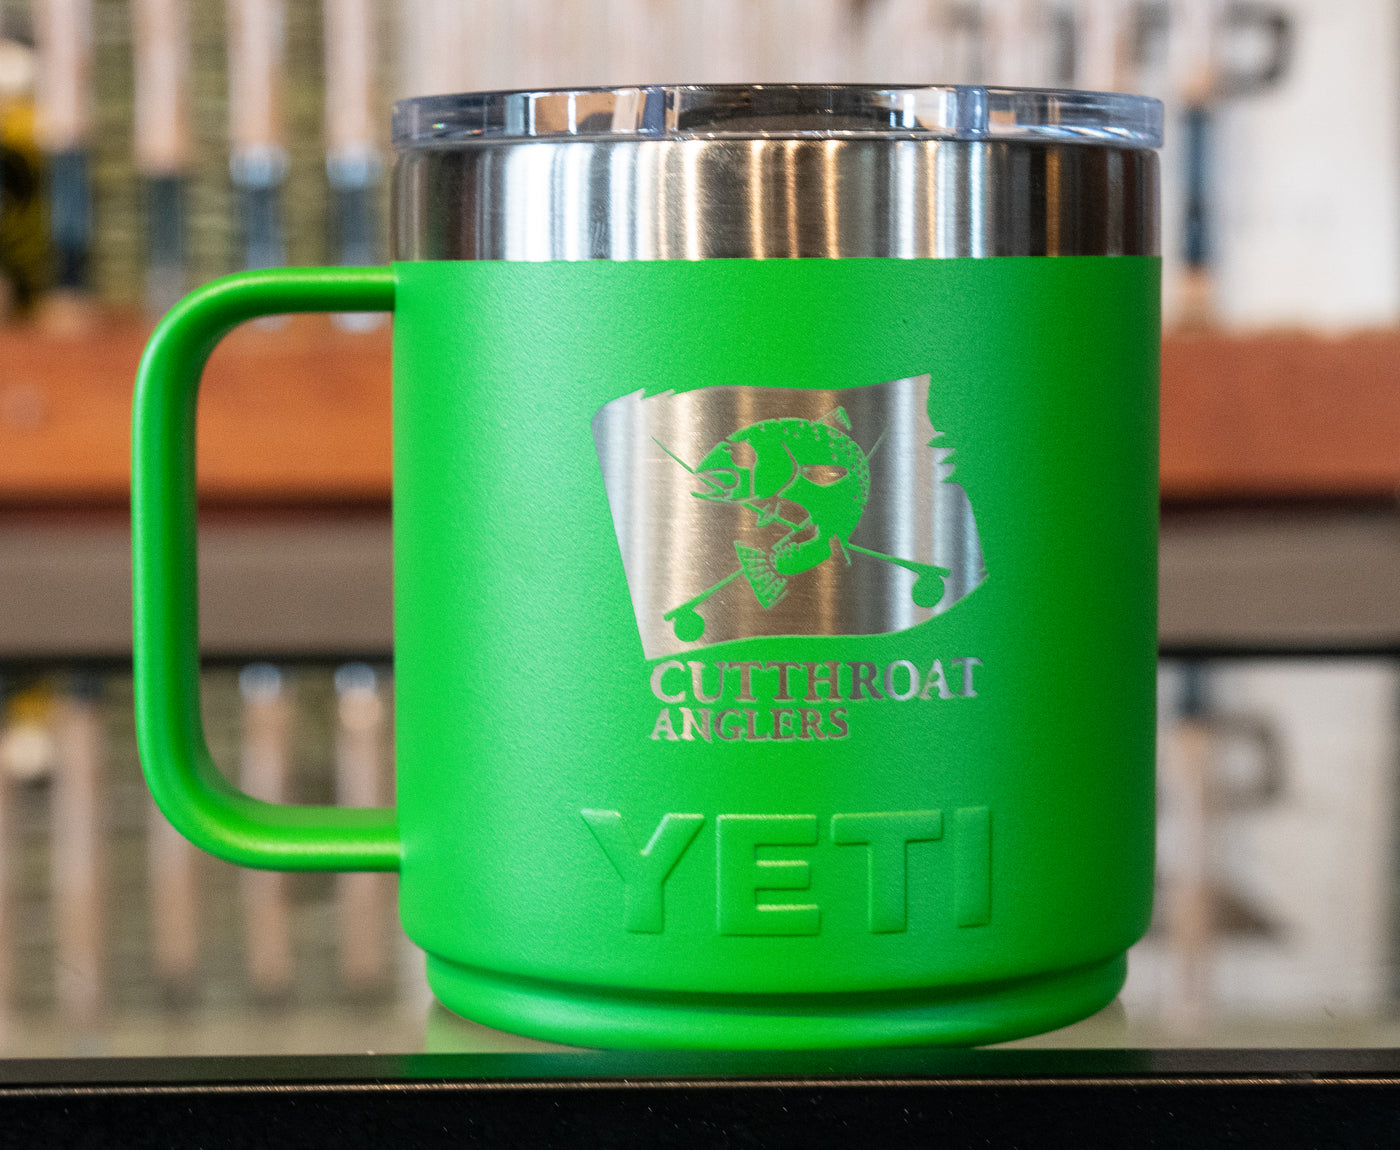 Yeti Rambler 10oz Wine Tumbler with Magslider Lid Canopy Green